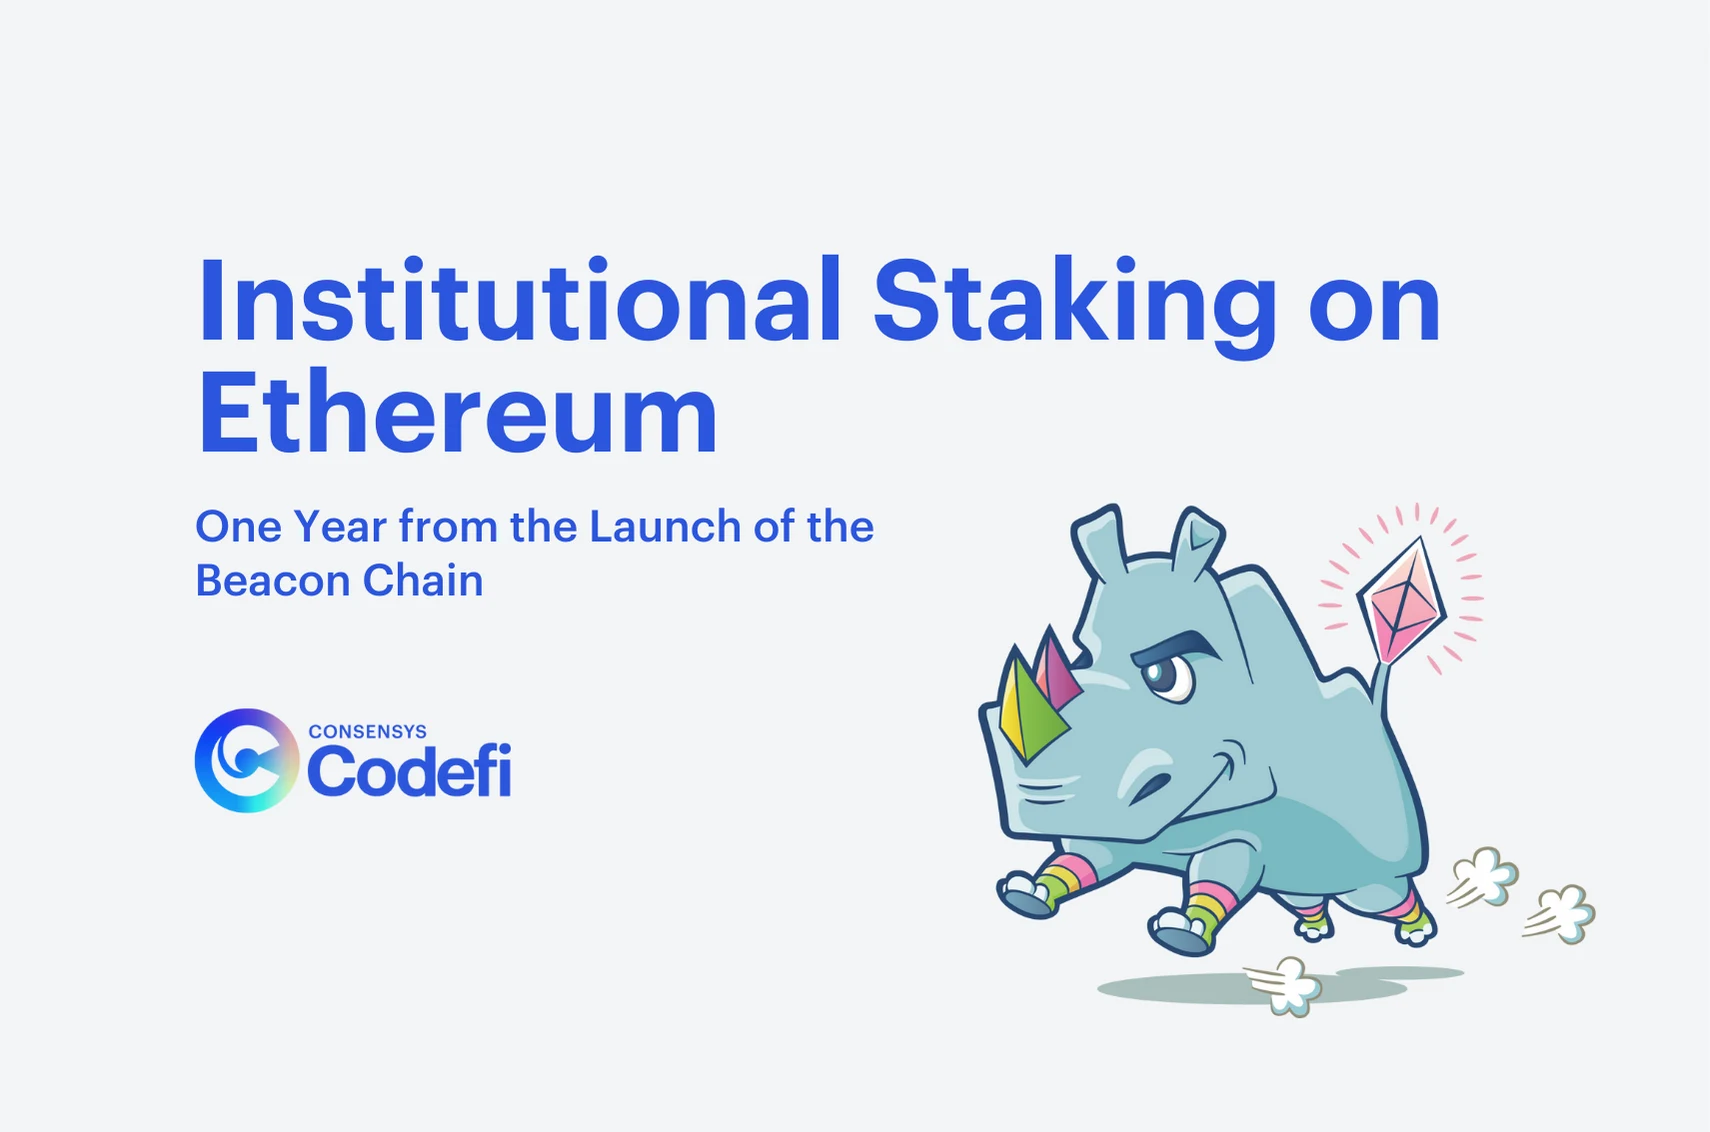 Image: Institutional Staking on Ethereum: One year after the launch of the Beacon Chain